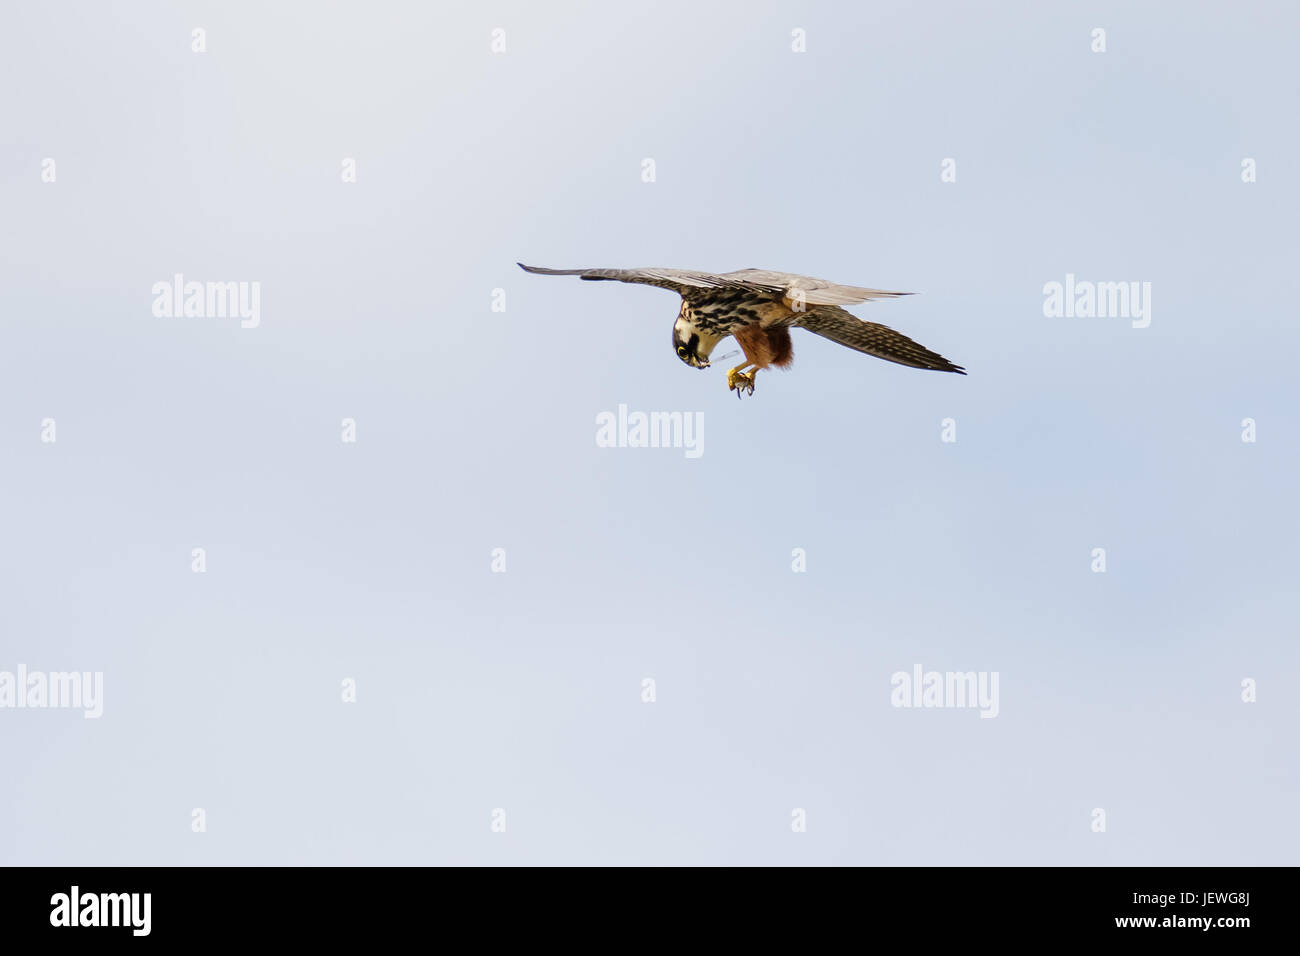 Hobby falcon (Falco subbuteo) dismembering eating feeding on chaser dragonfly on-the-wing flying against light cloudy sky Stock Photo